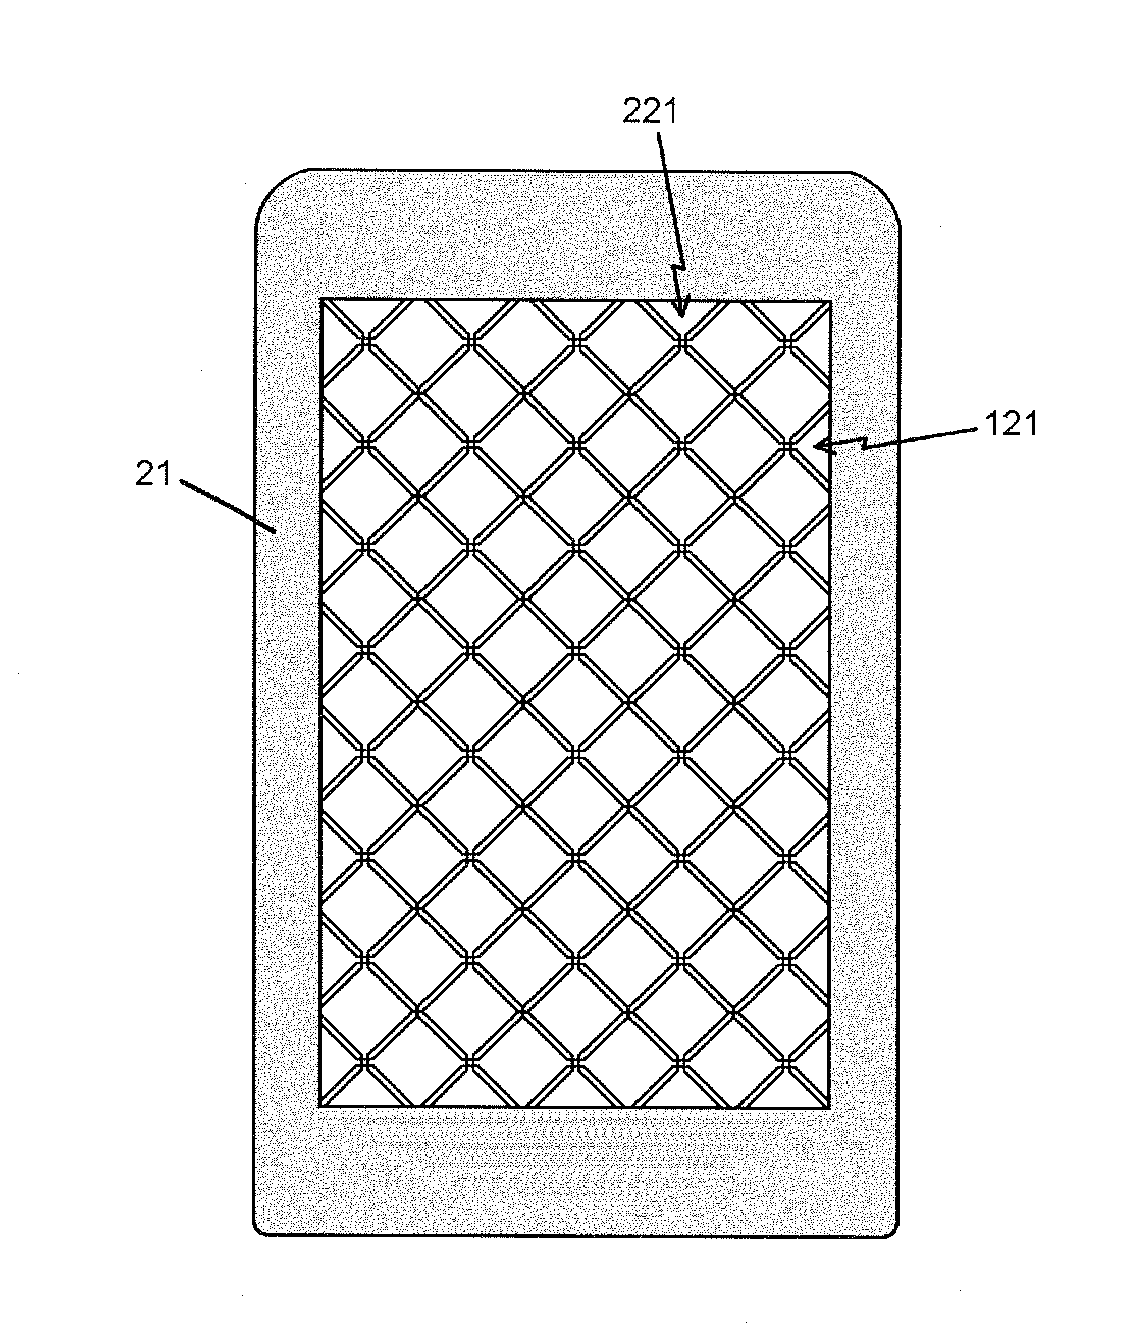 Capacitive touch pad